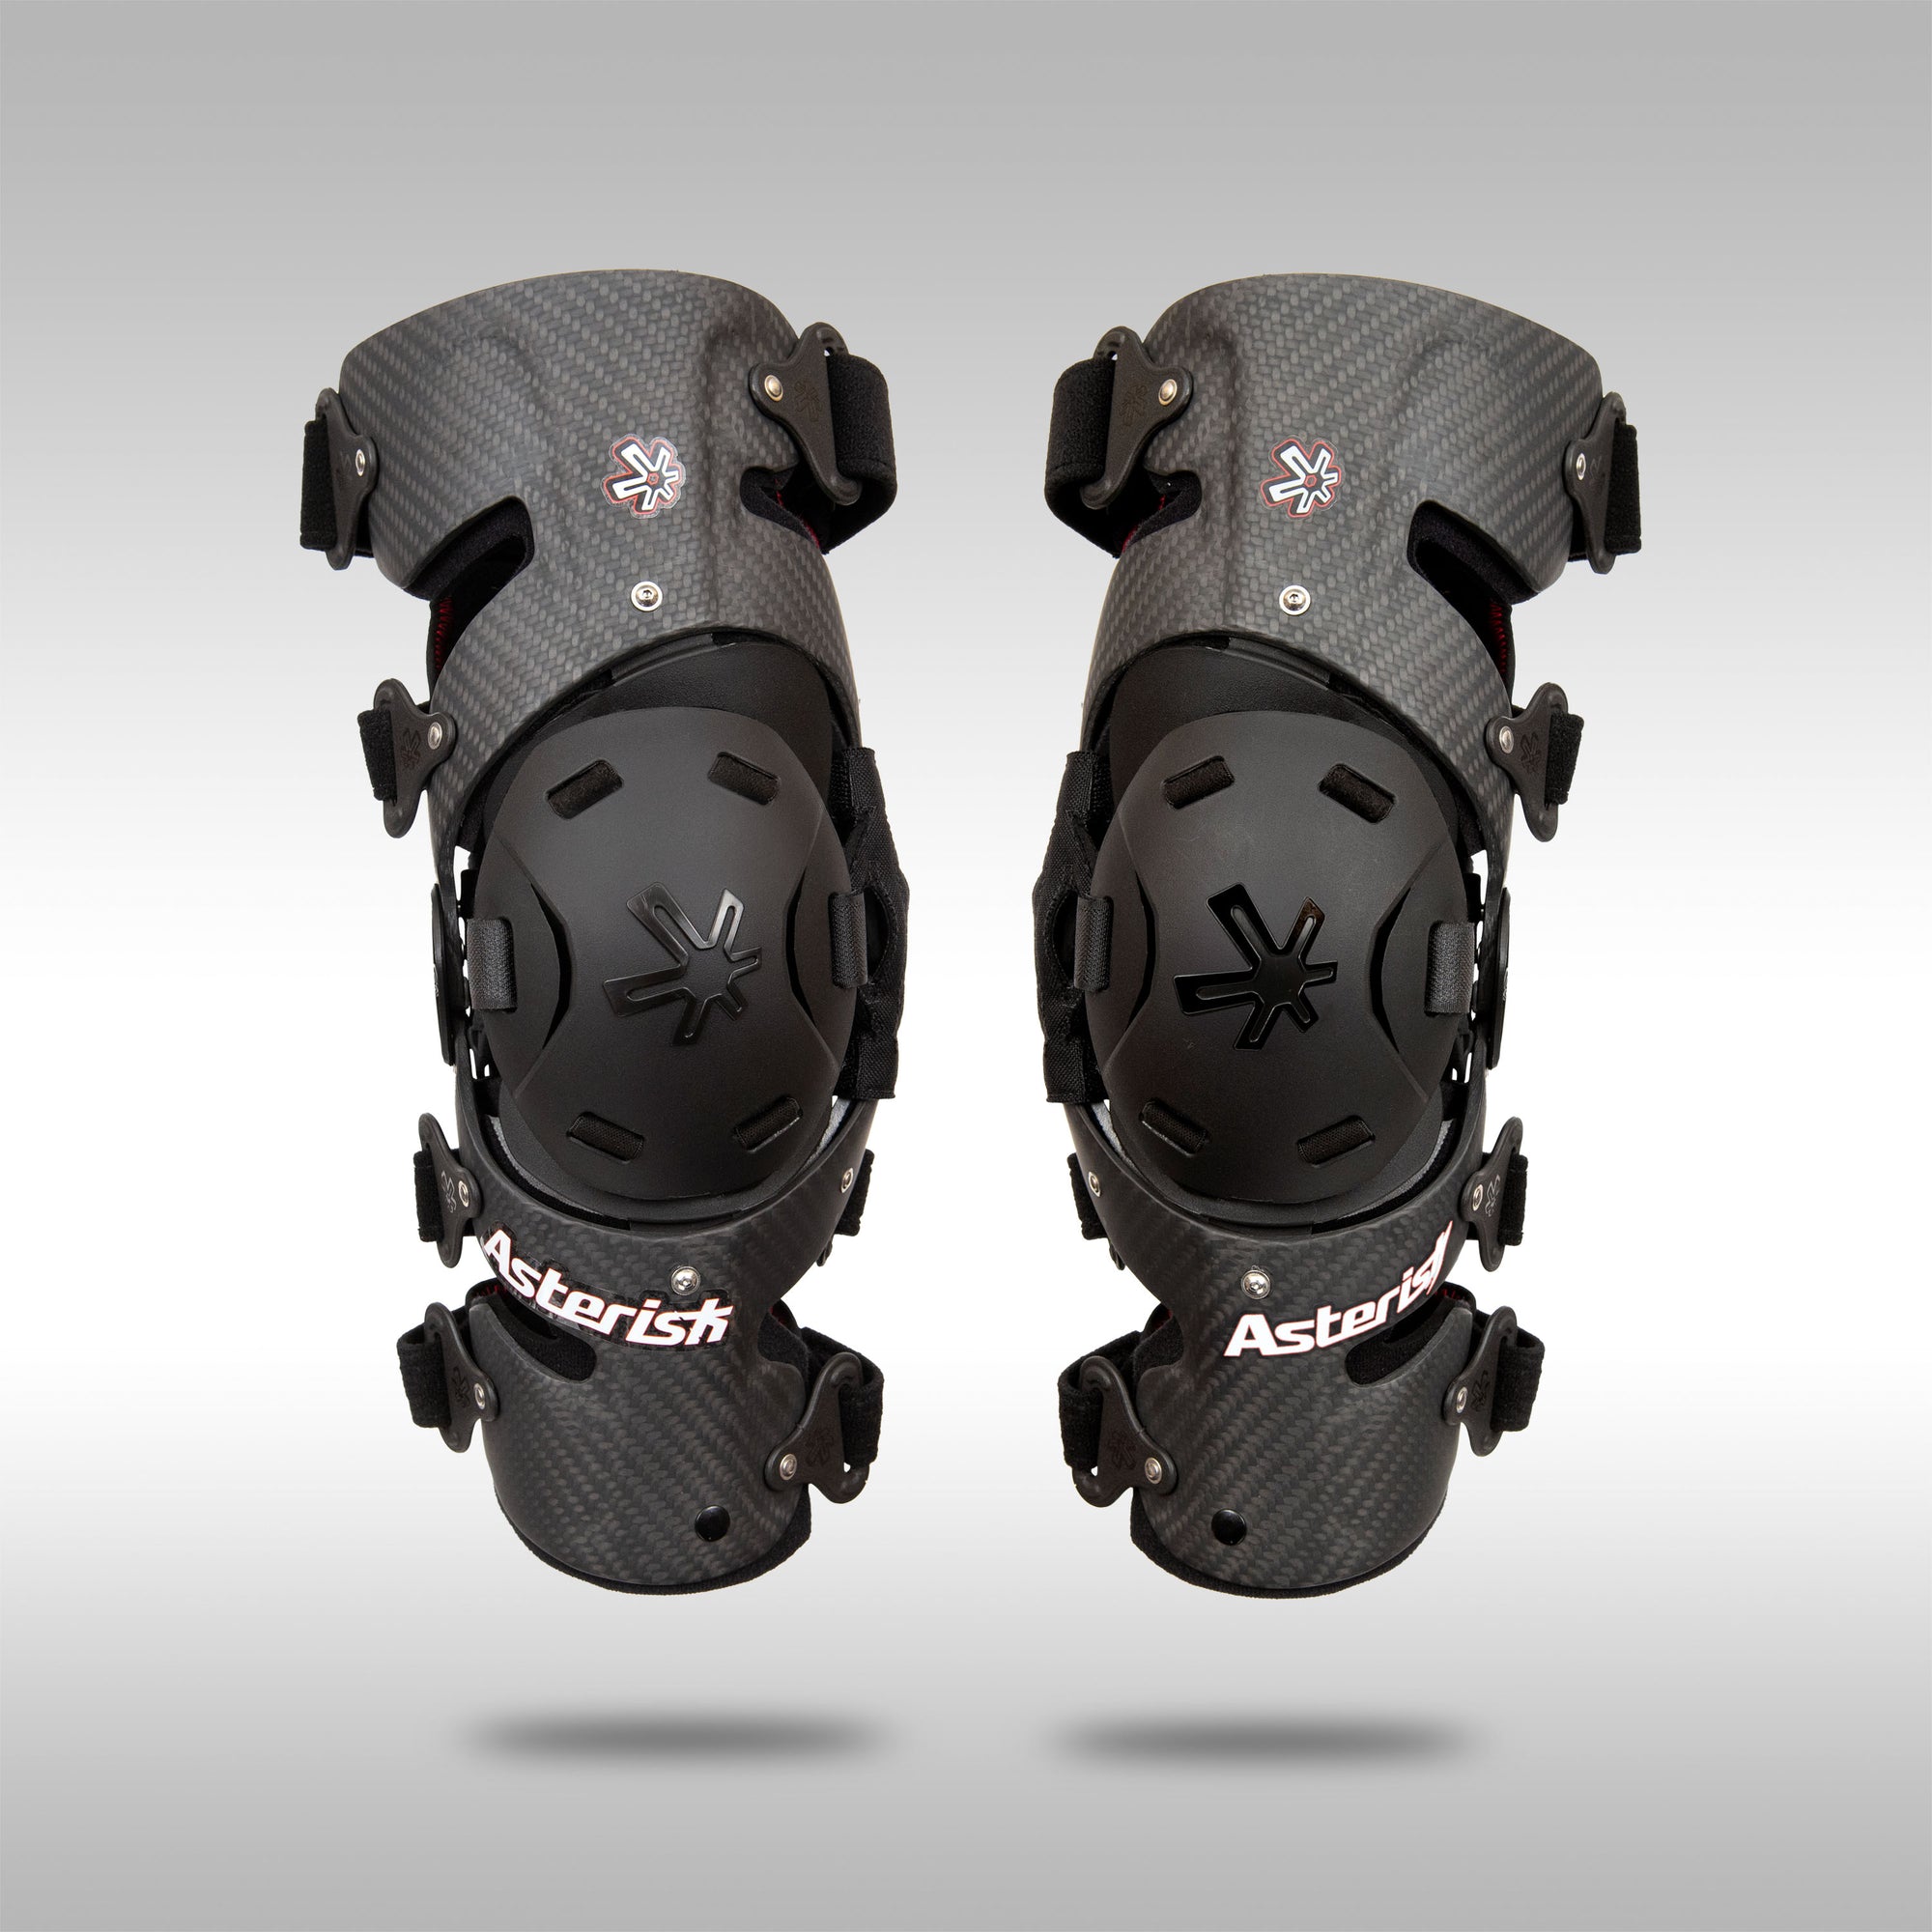 Asterisk Carbon Pro Knee Braces. Protect your knees from the rigiors of motocross, supercross, endurocross, offroad motorcycle and any other high impact activities you participate in. Asterisk knee braces are USA MADE.